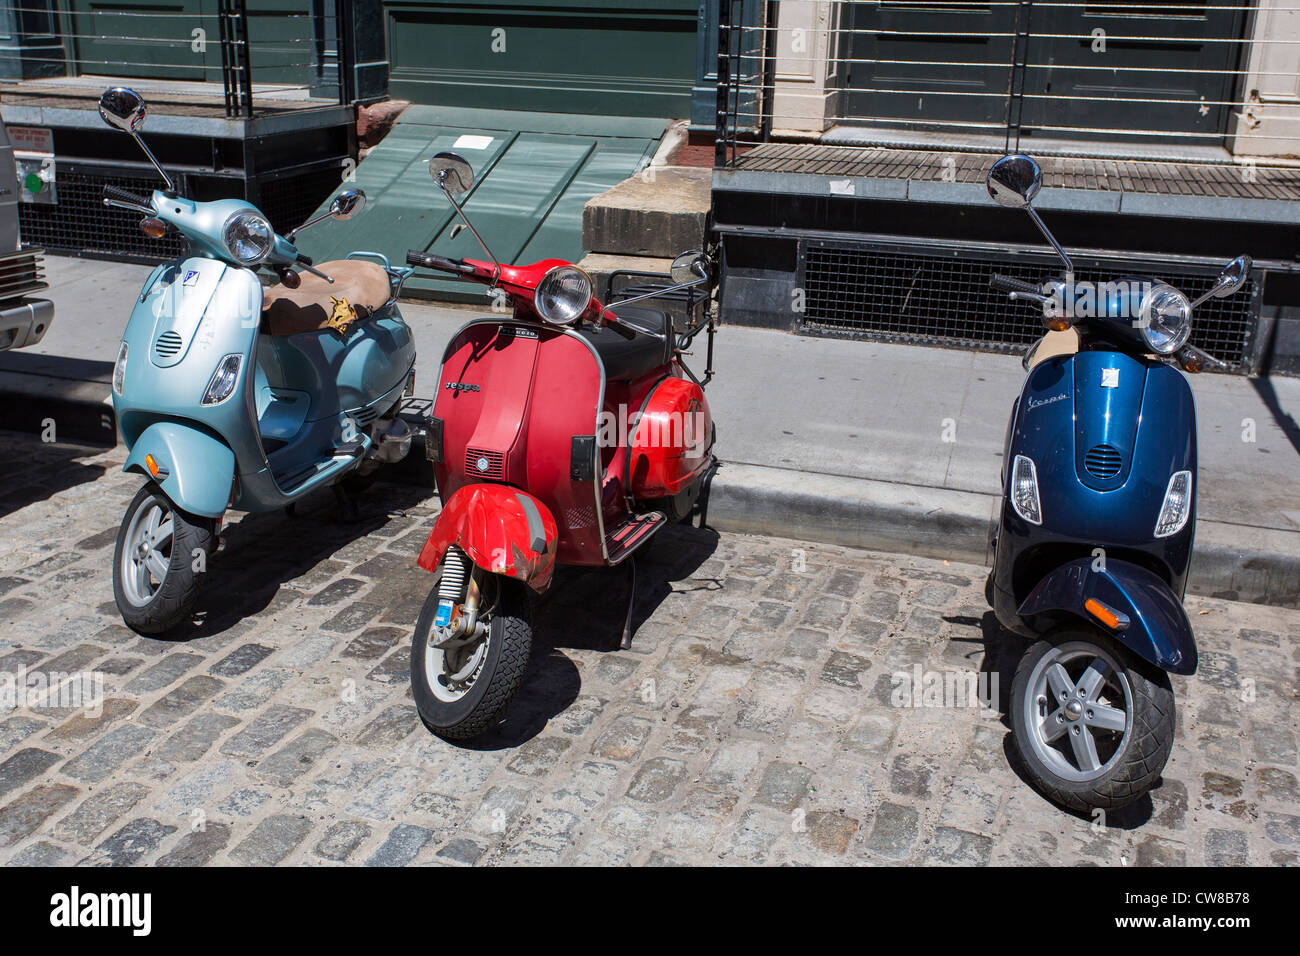 Three Vespa scooters parked on the street of New York City Stock Photo